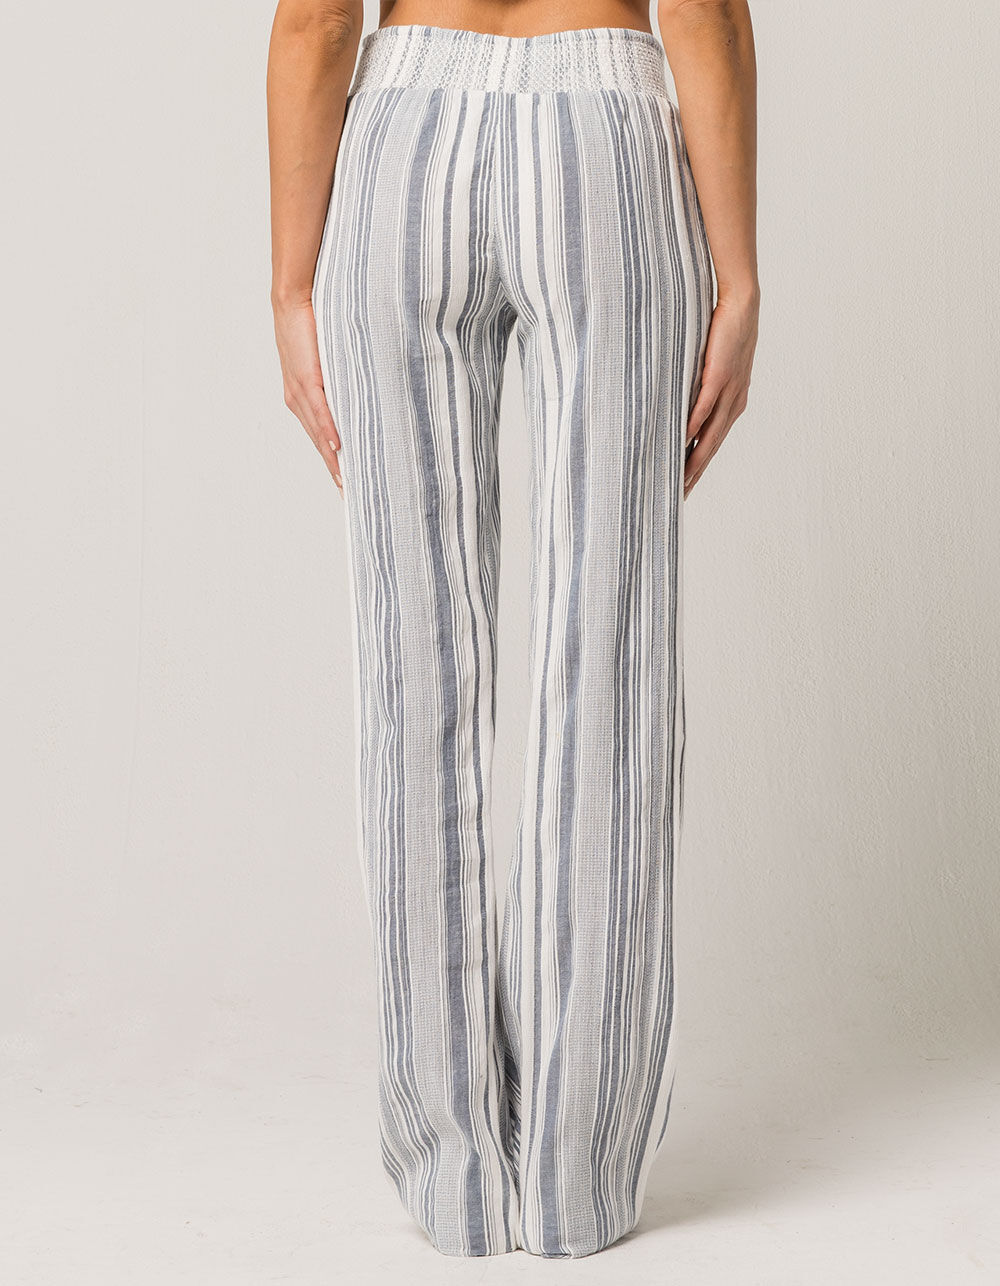 OTHERS FOLLOW Stripe Womens Pants image number 2